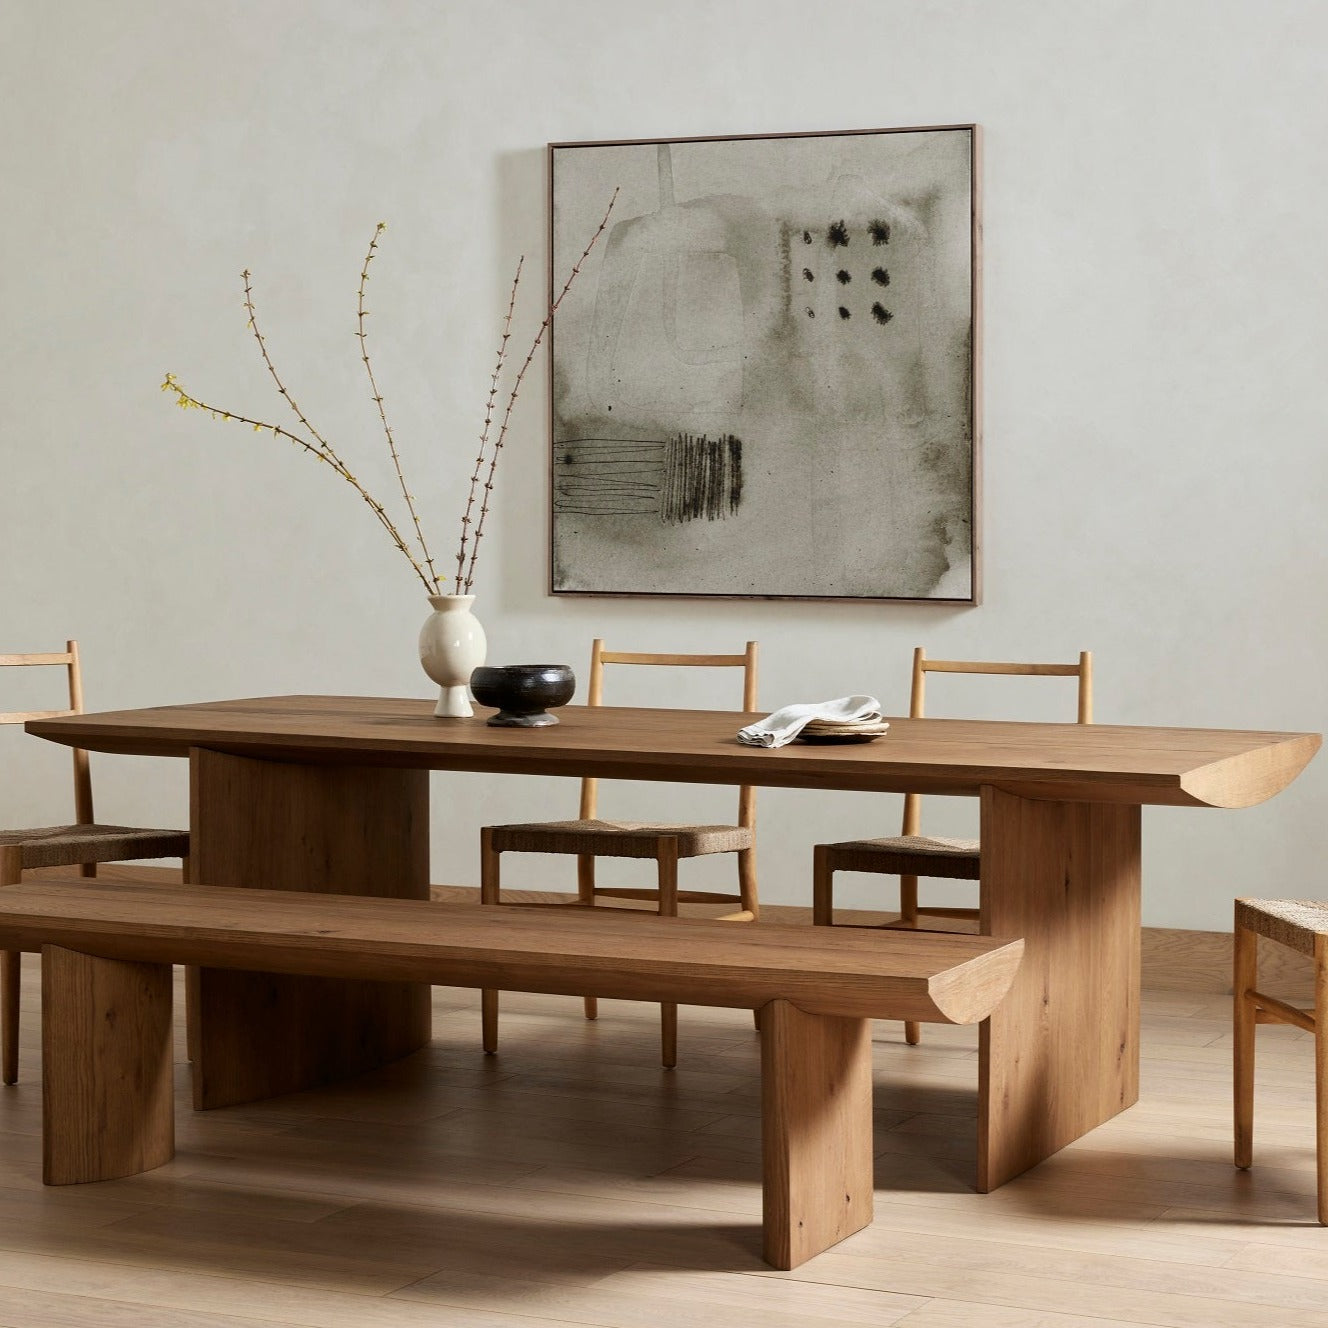 Pickford Dining Table